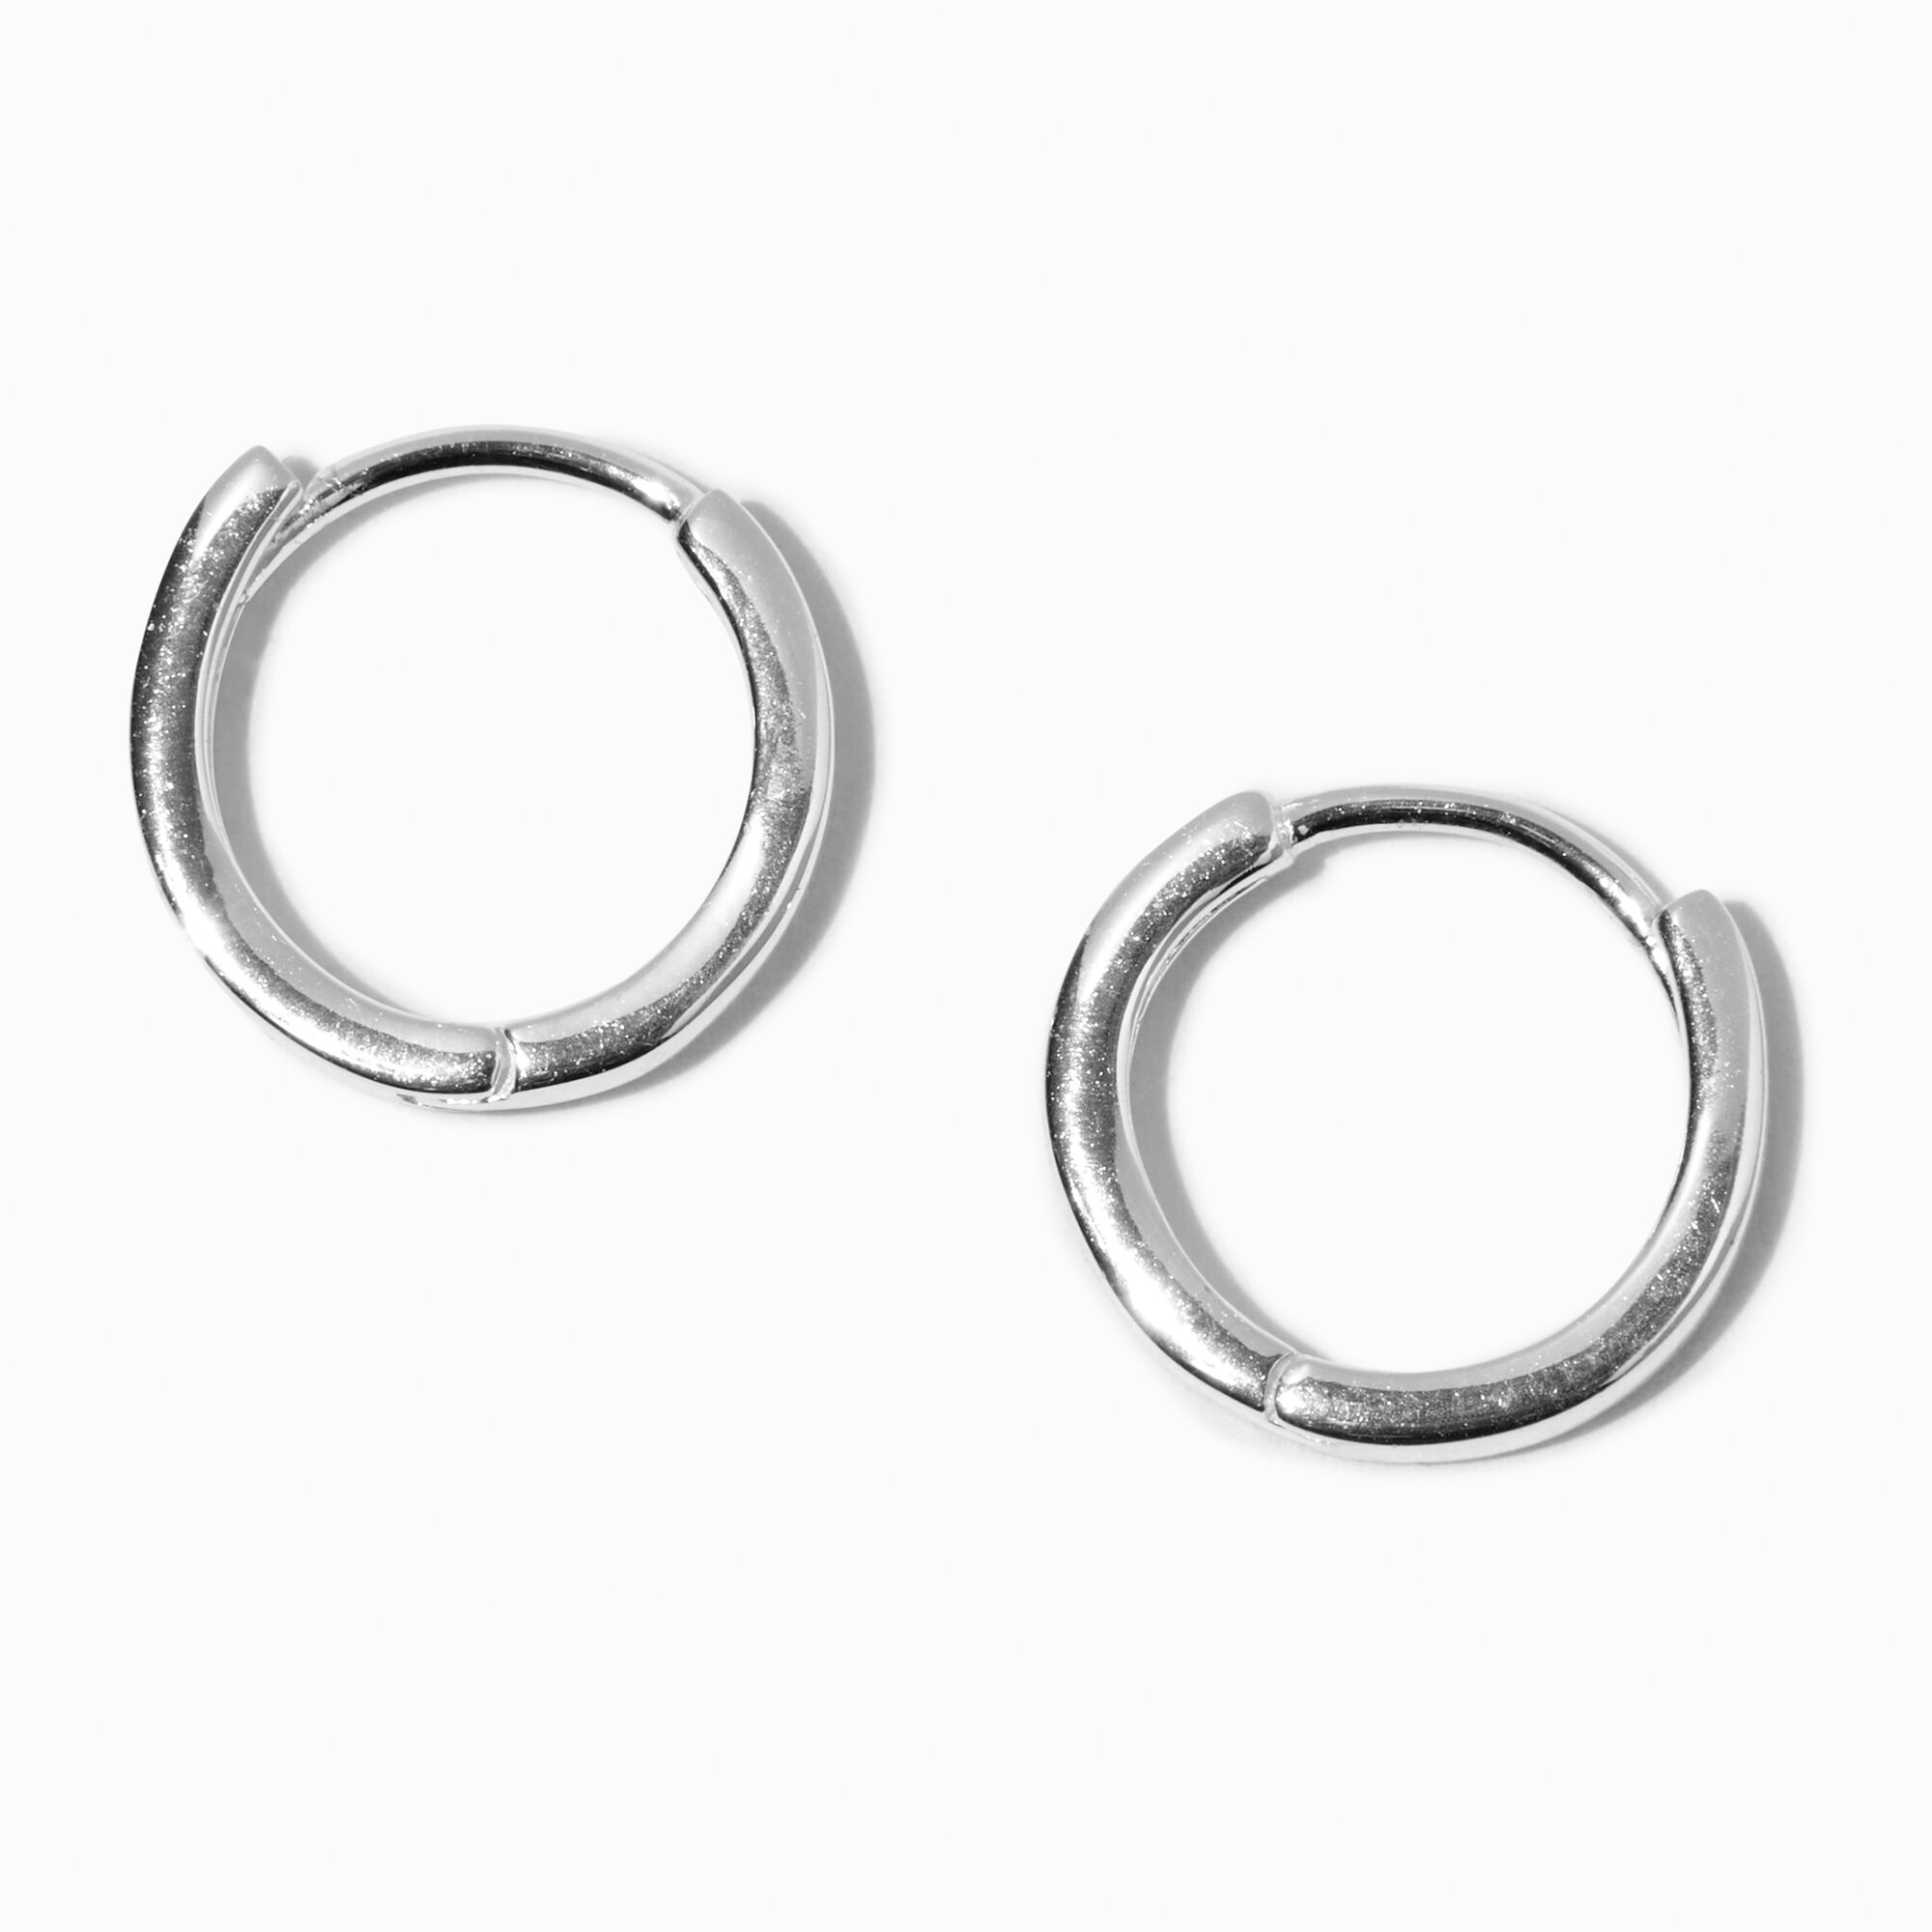 View C Luxe By Claires 10MM Clicker Hoop Earrings Silver information